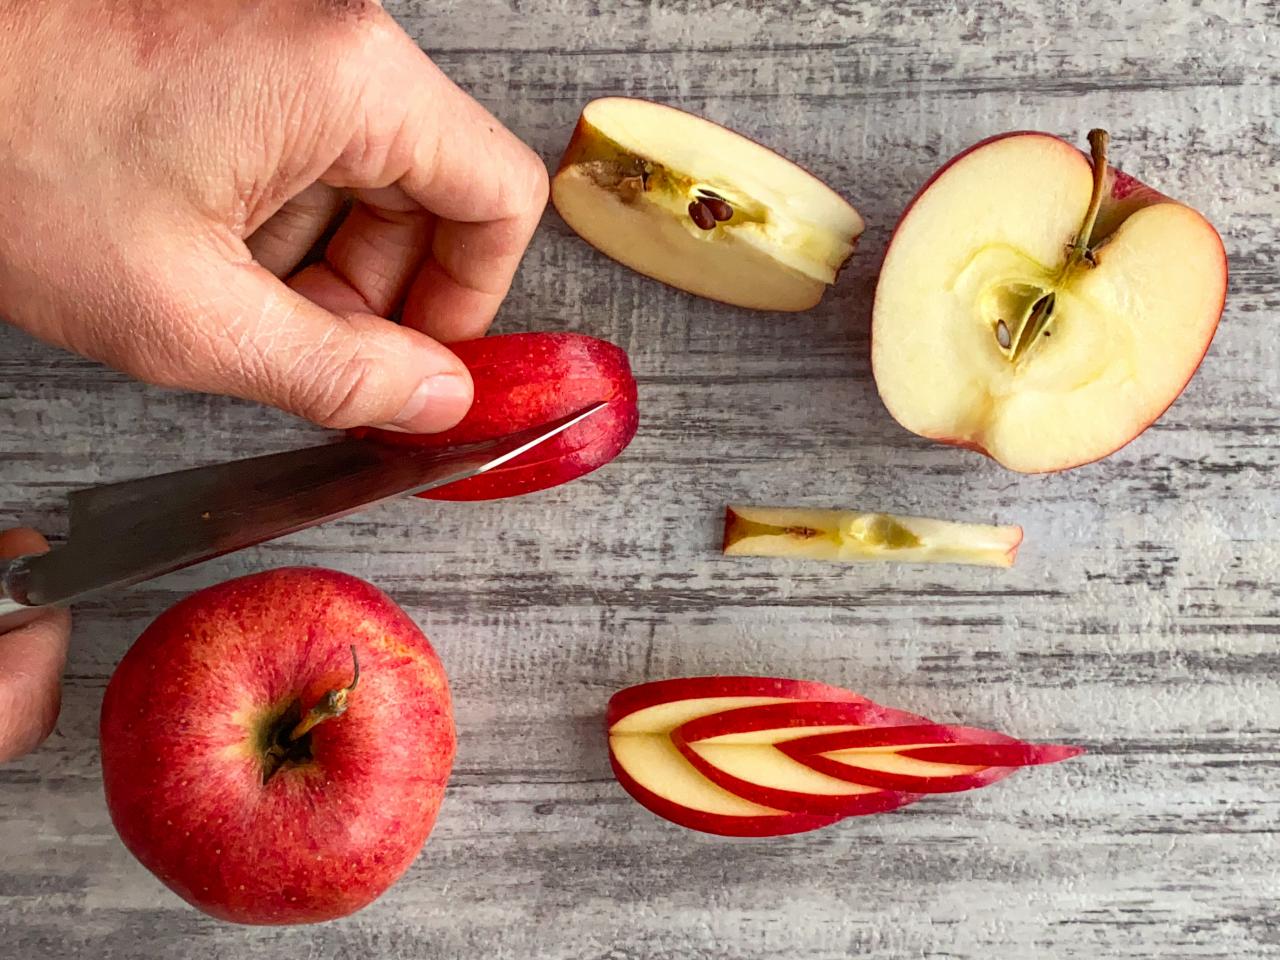 How to Safely Cut Fruits and Vegetables